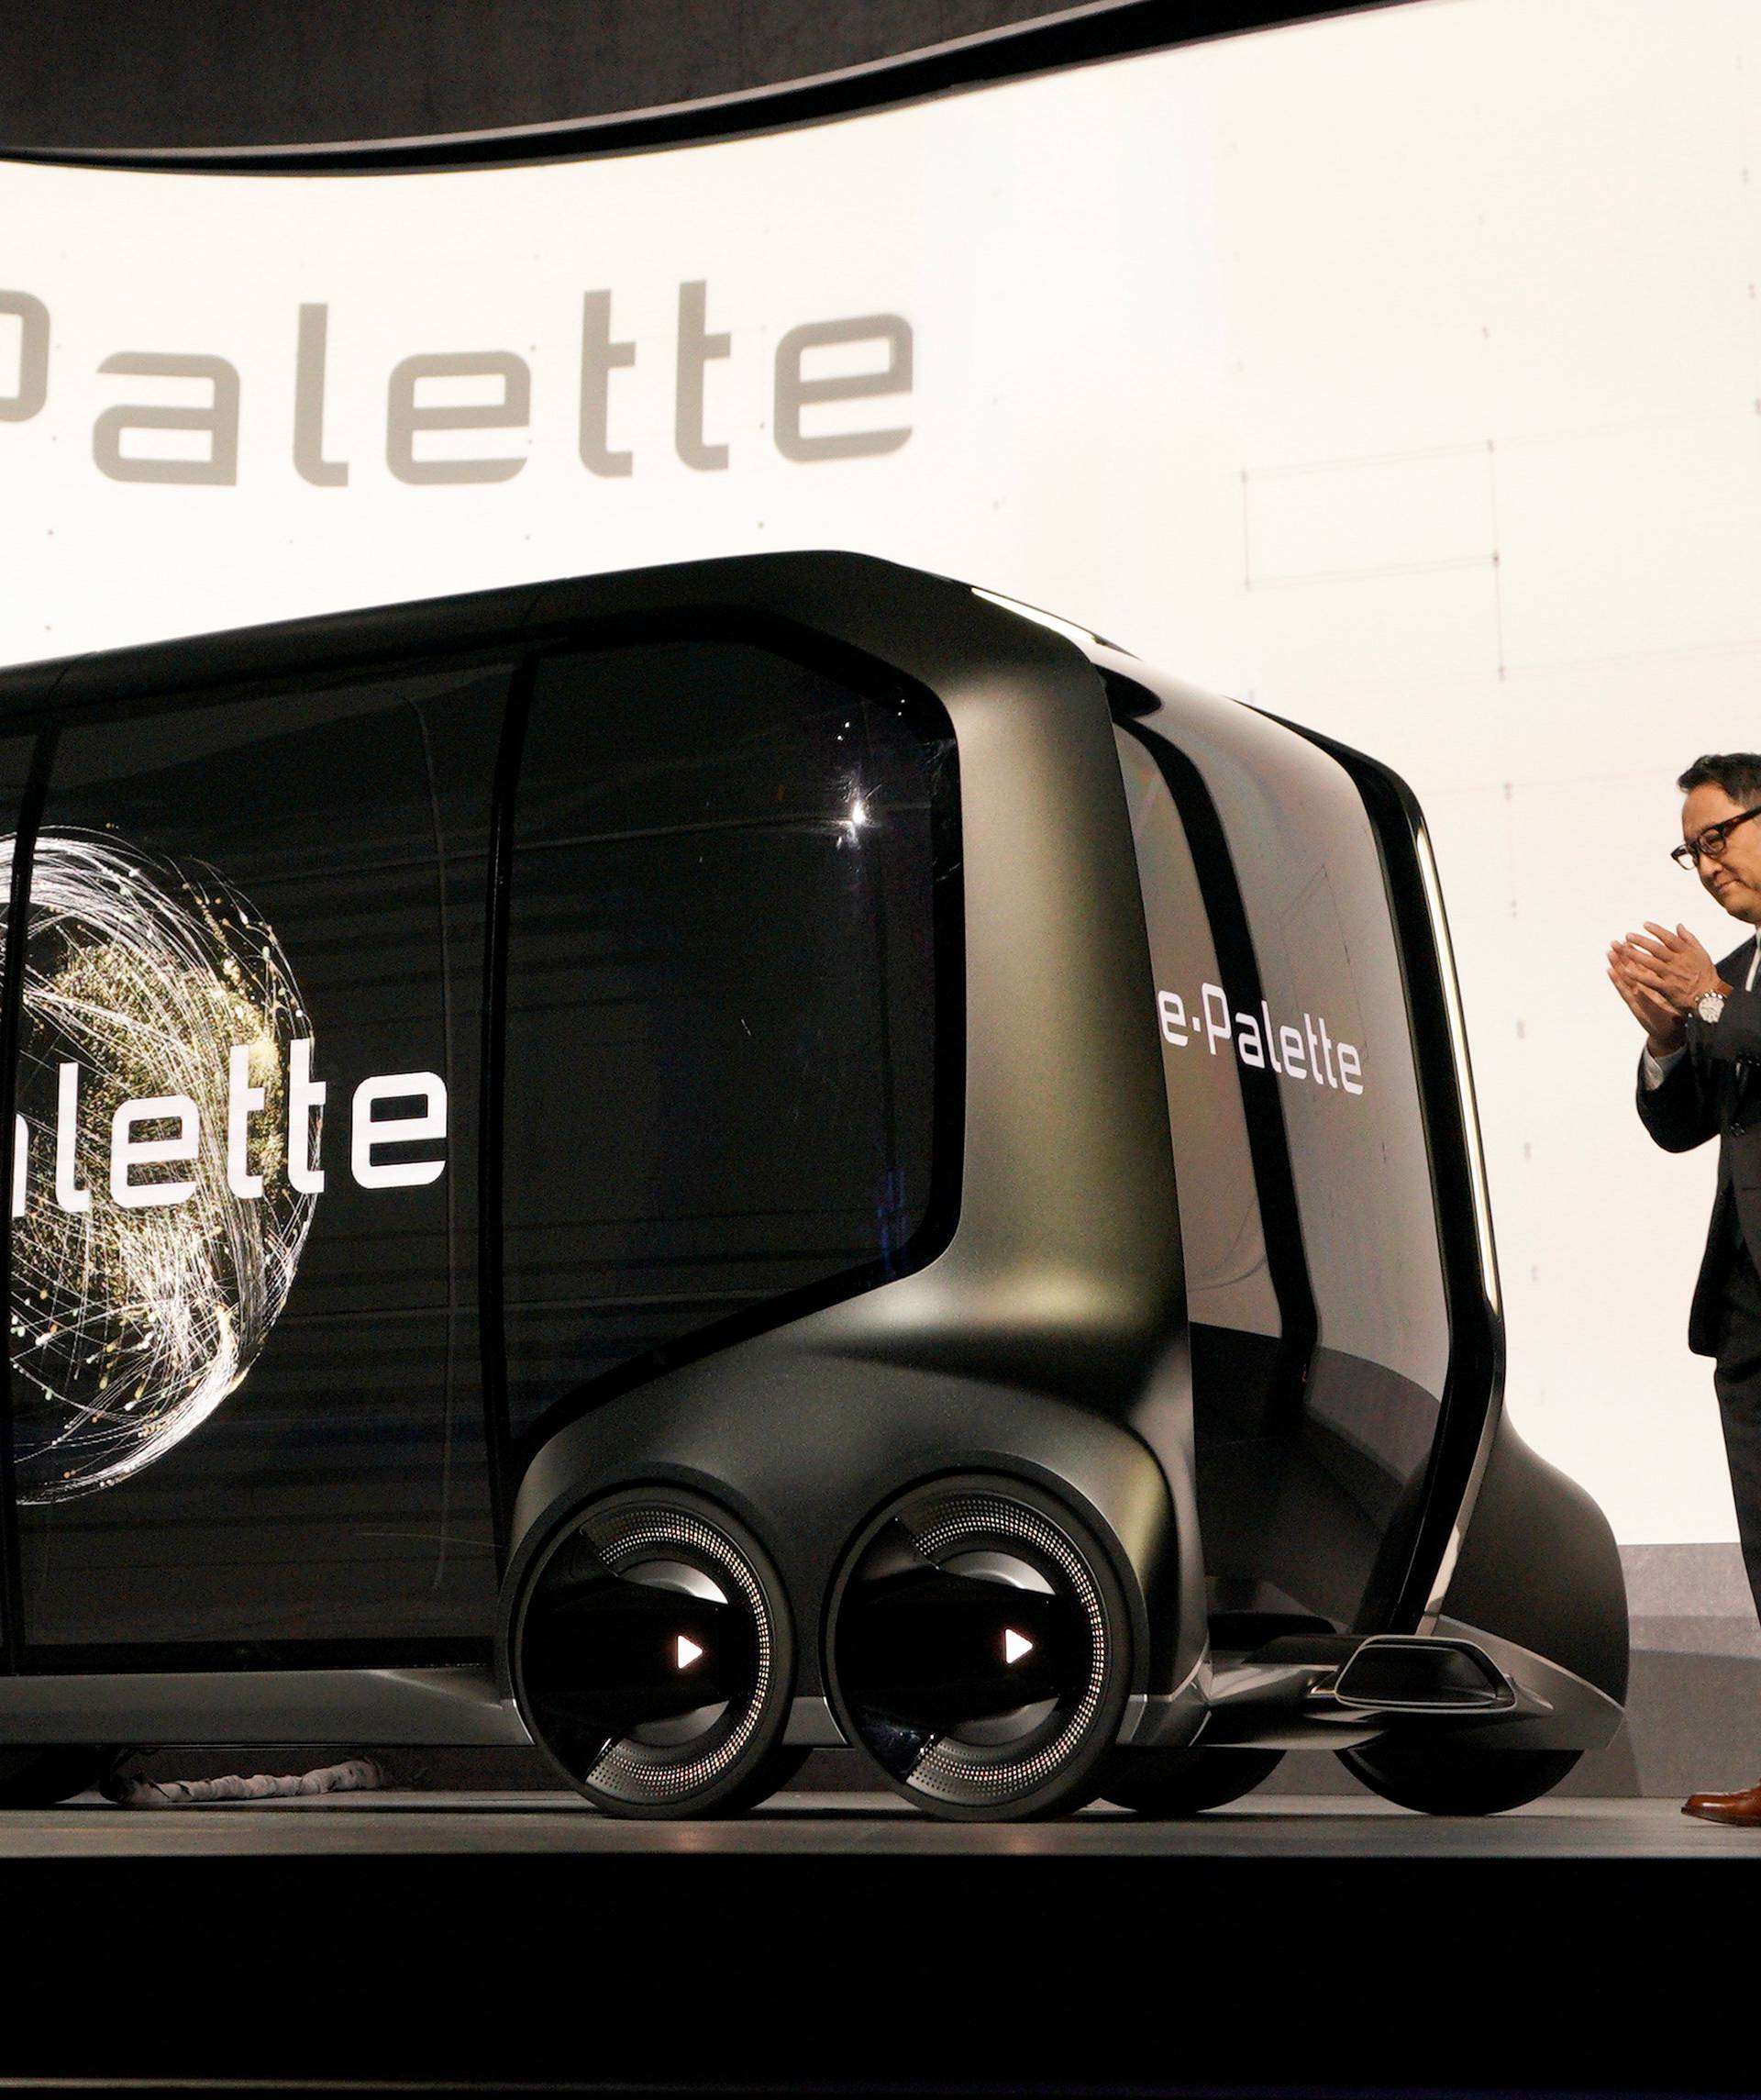 Akio Toyoda, president of Toyota Motor Corporation, announces the "e-Pallete", a new fully self-driving electric concept vehicle, in Las Vegas